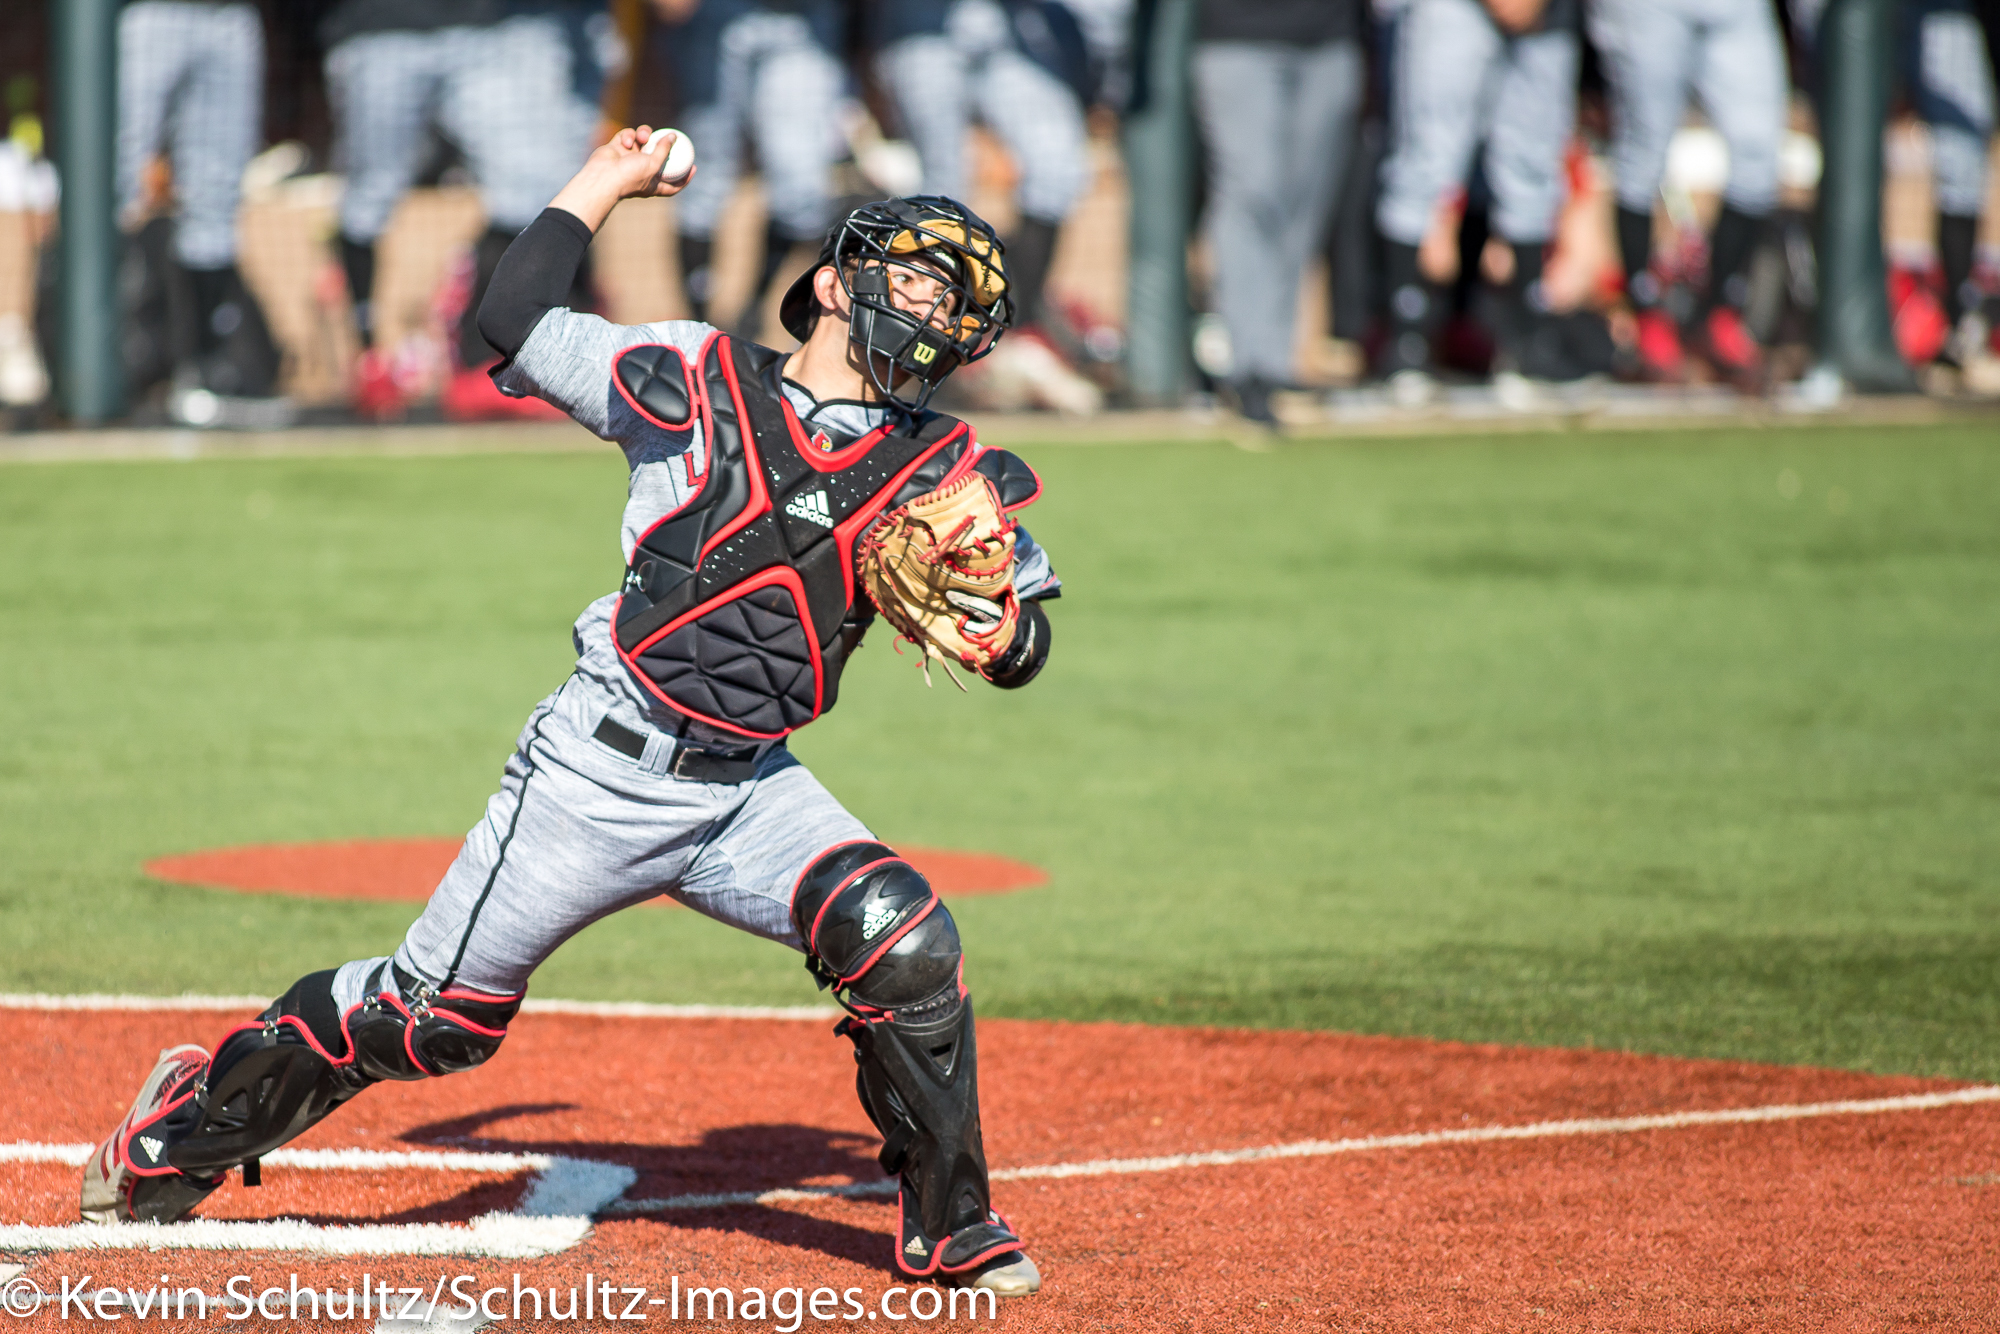 Louisville releases 2019 Schedule - College Baseball Daily